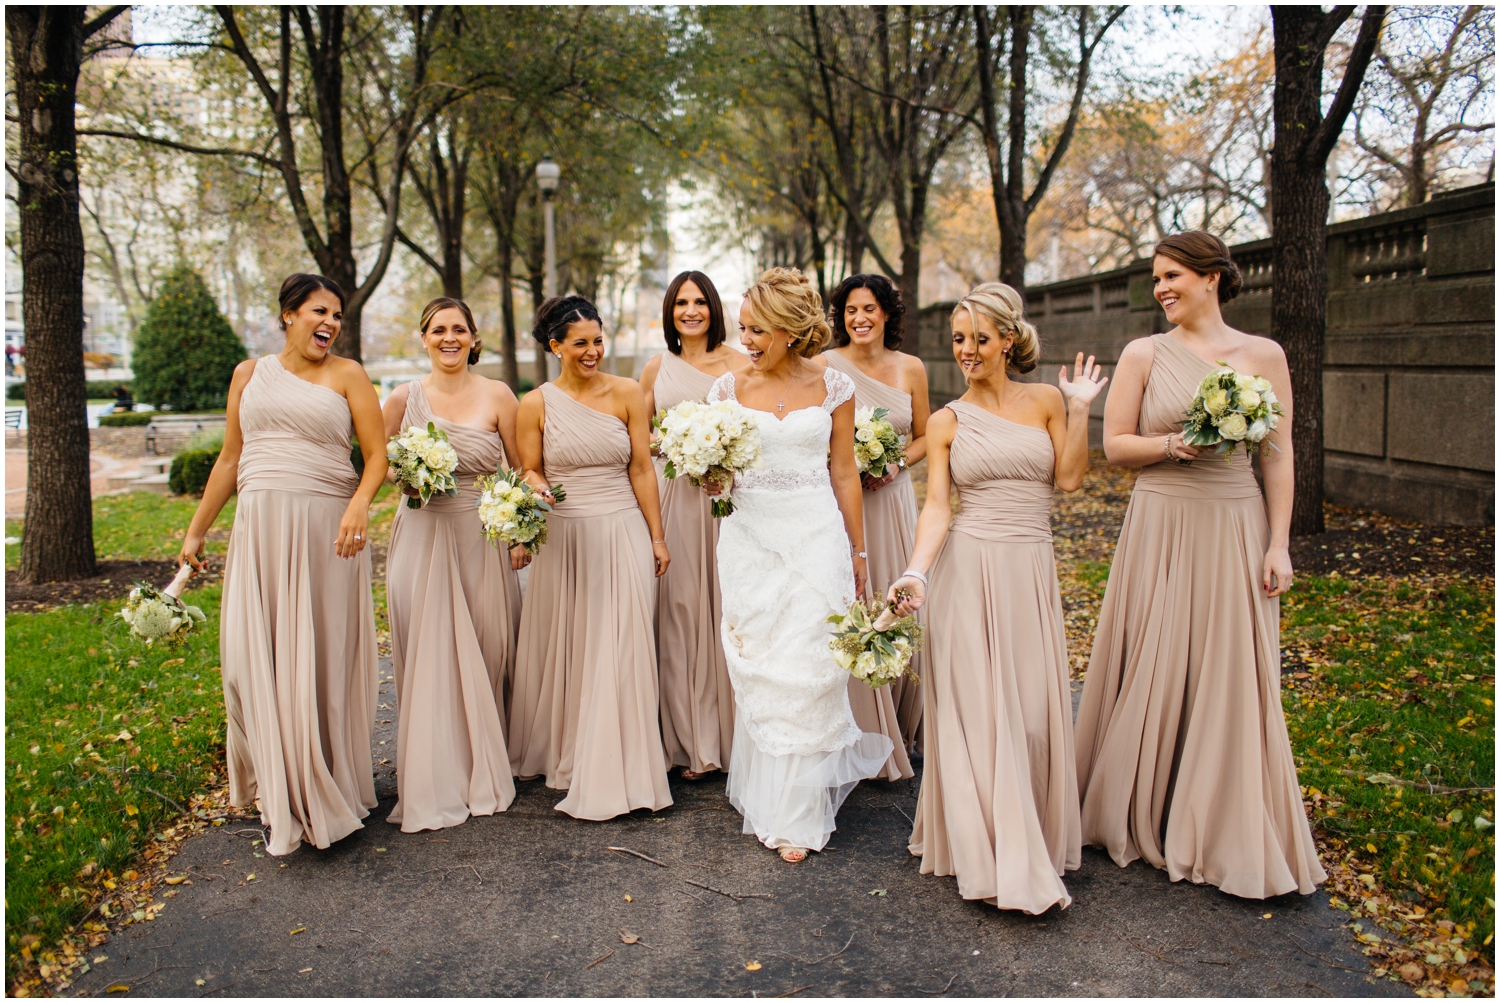 Best Weddings of 2014 | Favorite Photos of the year | Chicago Wedding Photographer | Jill Tiongco Photography